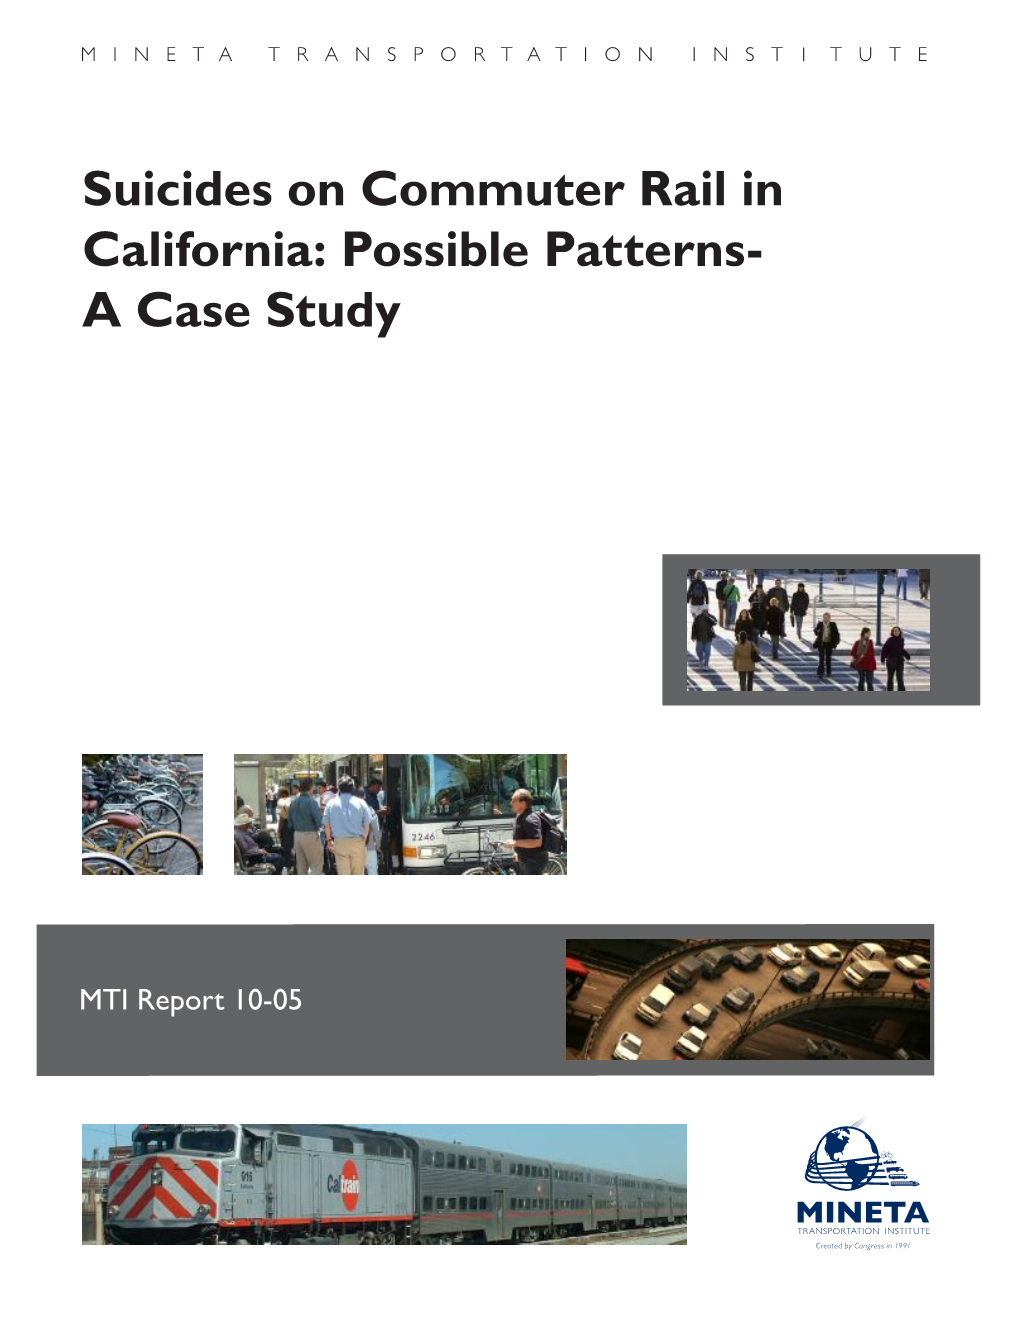 Suicides on Commuter Rail in California